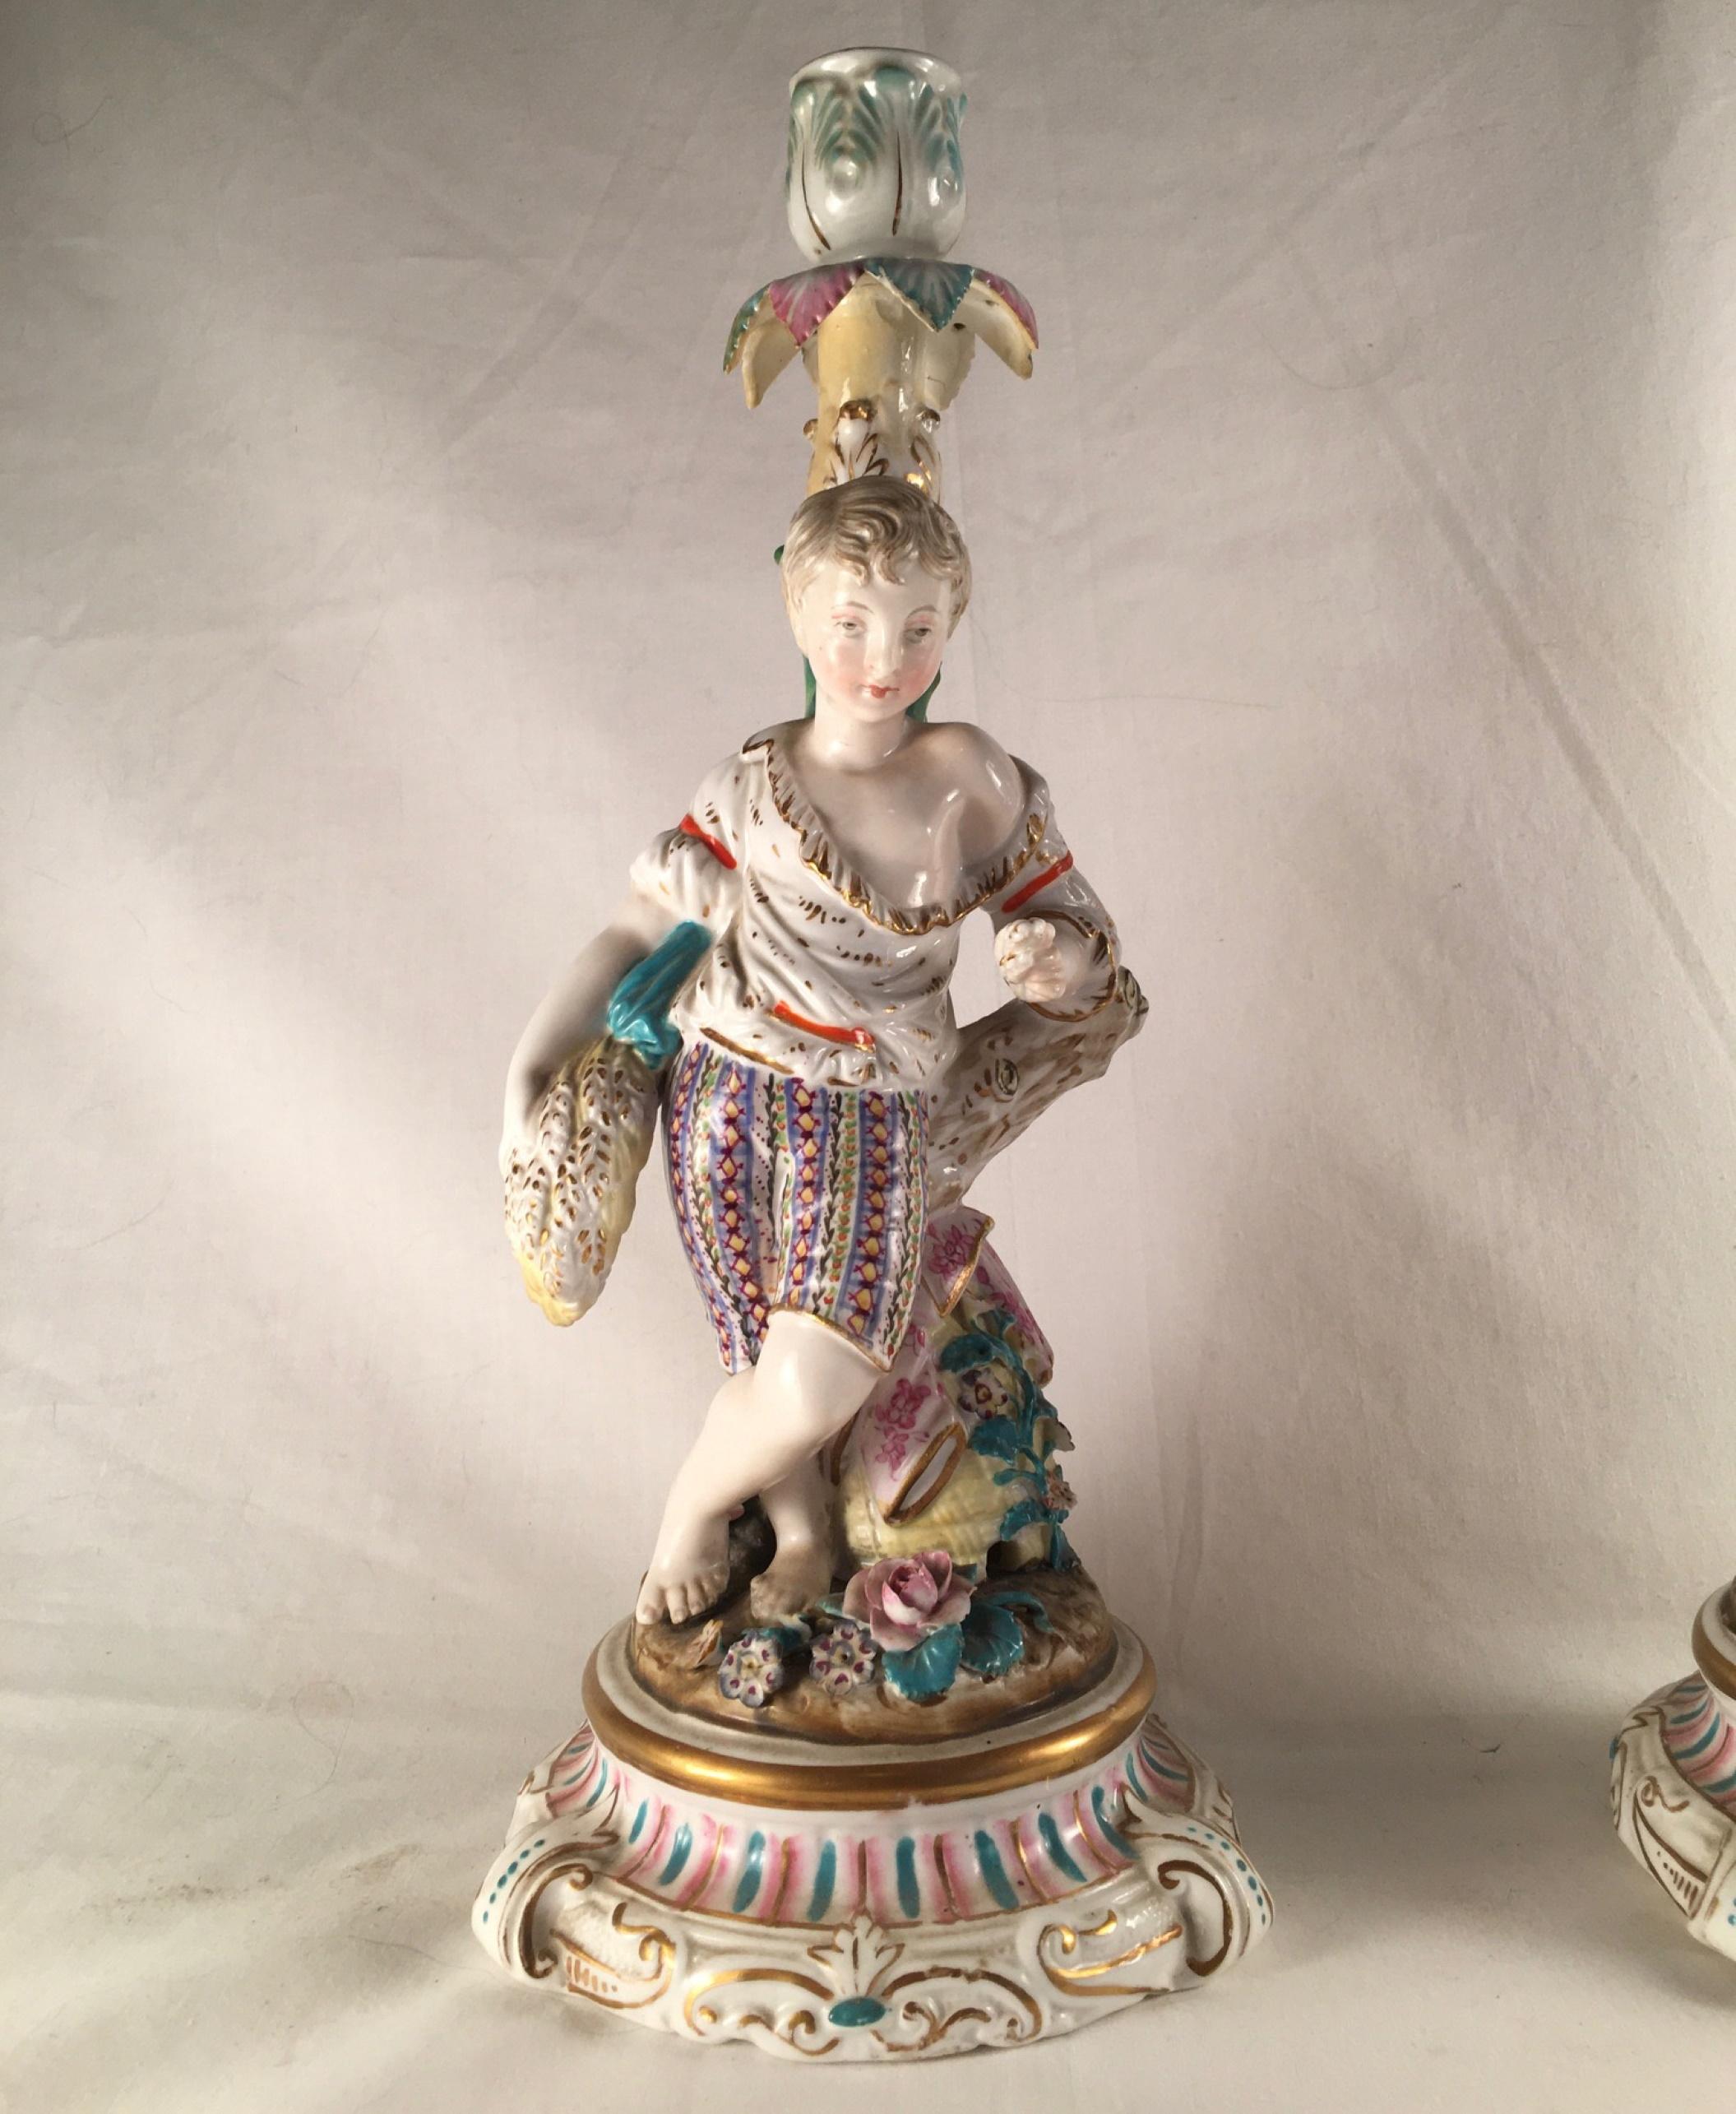 Pair of Porcelain Rococo style figural candlesticks ca. 1850

This pair of large and lovely candle holders is hand painted in exquisite detail and highlighted in gold. The enamel decoration has Meissen quality. The fine figures are rare and